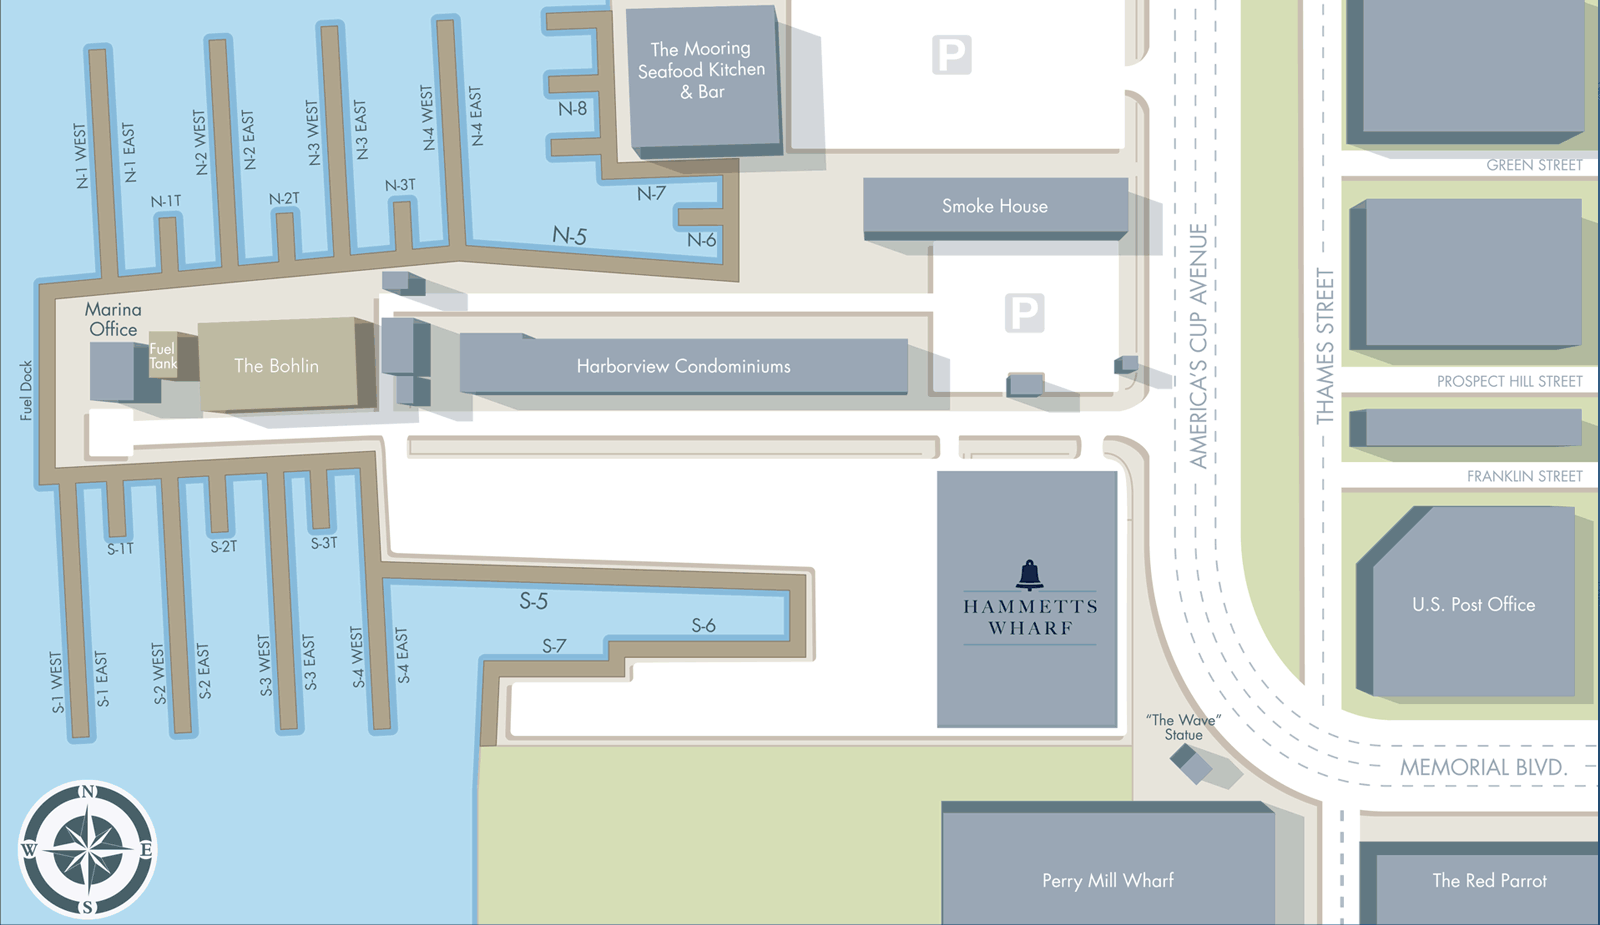 Map of the Newport Yachting Center and areas in surrounding Newport RI